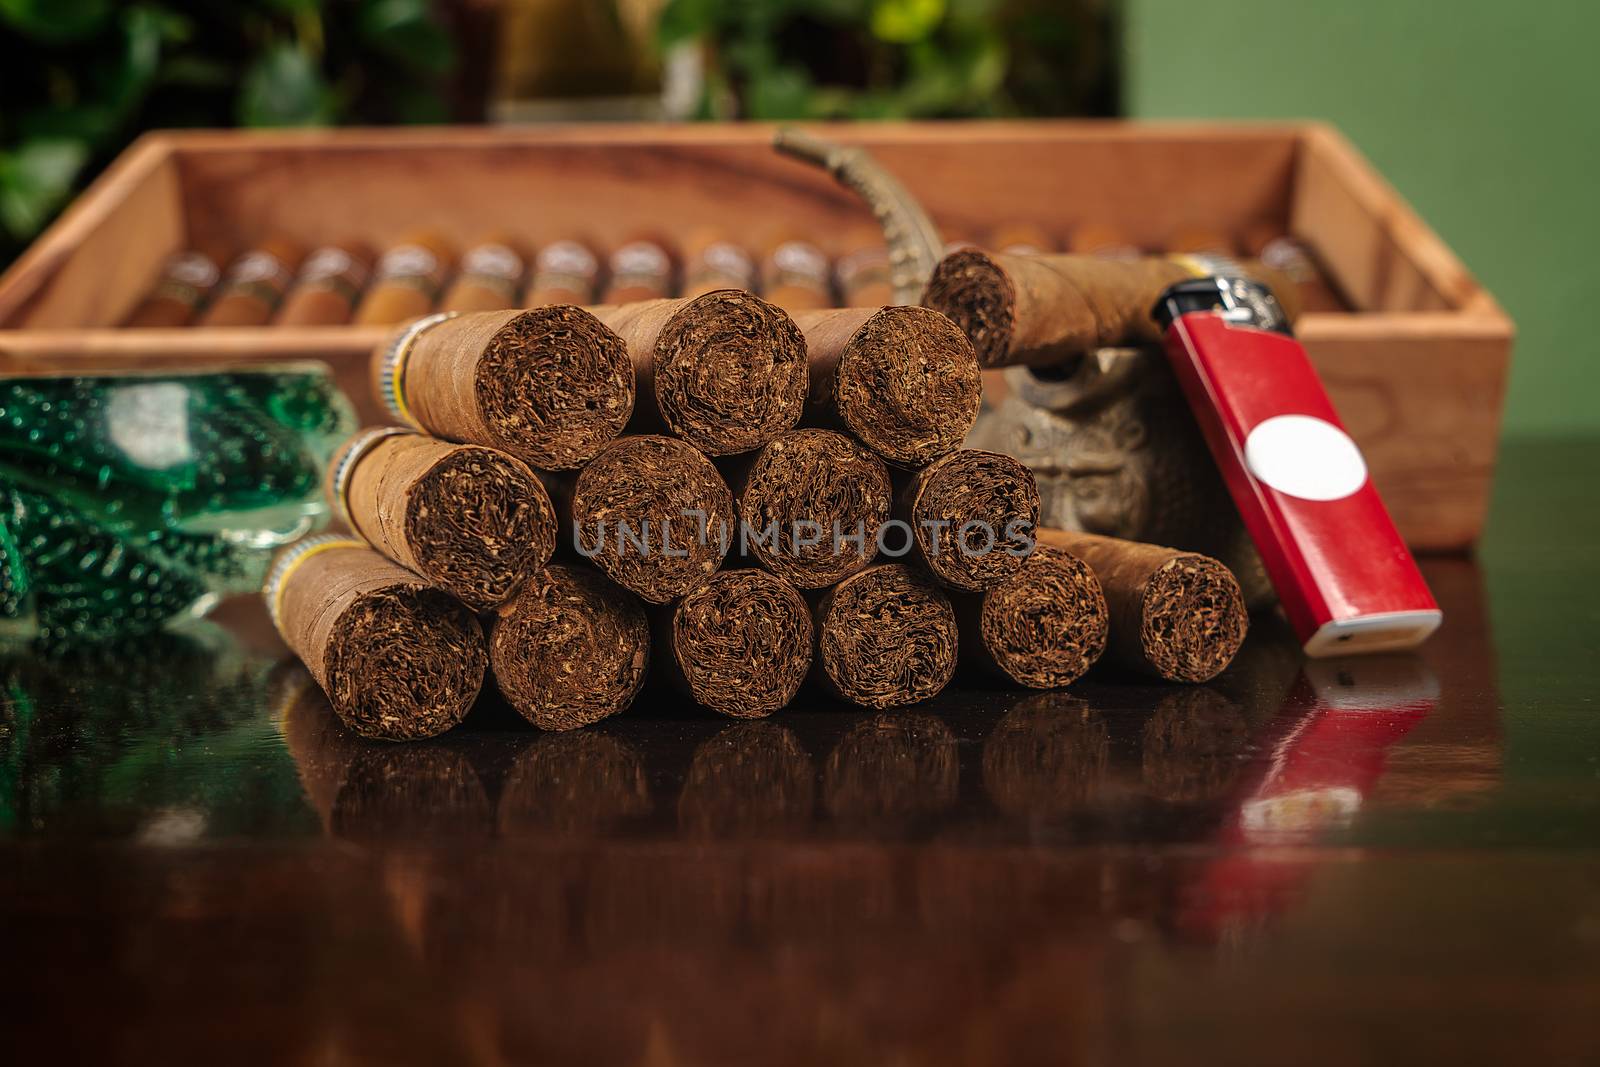 A group of cigars, a lighter, two ashtray and a unfocused box with cigars inside on a brown table